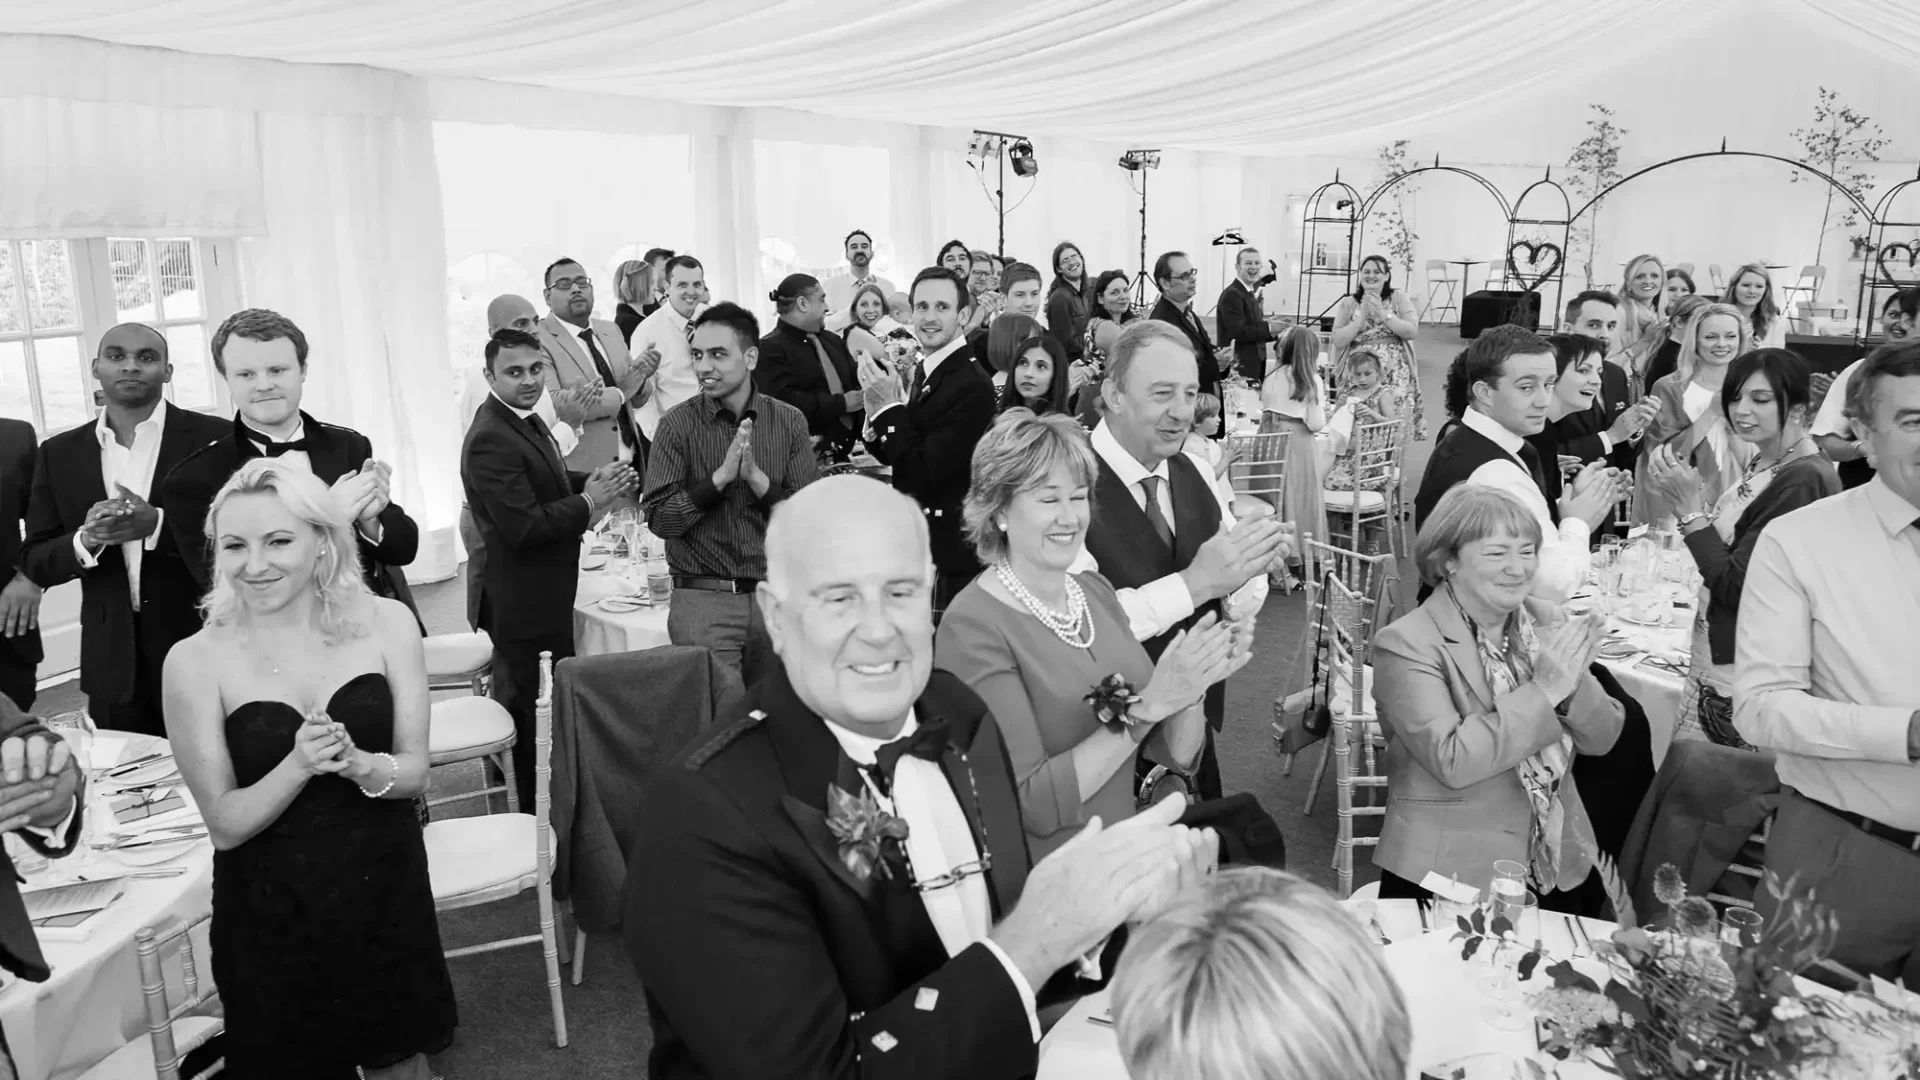 Guests in formal attire applauding at a wedding reception in a tent, image in black and white.